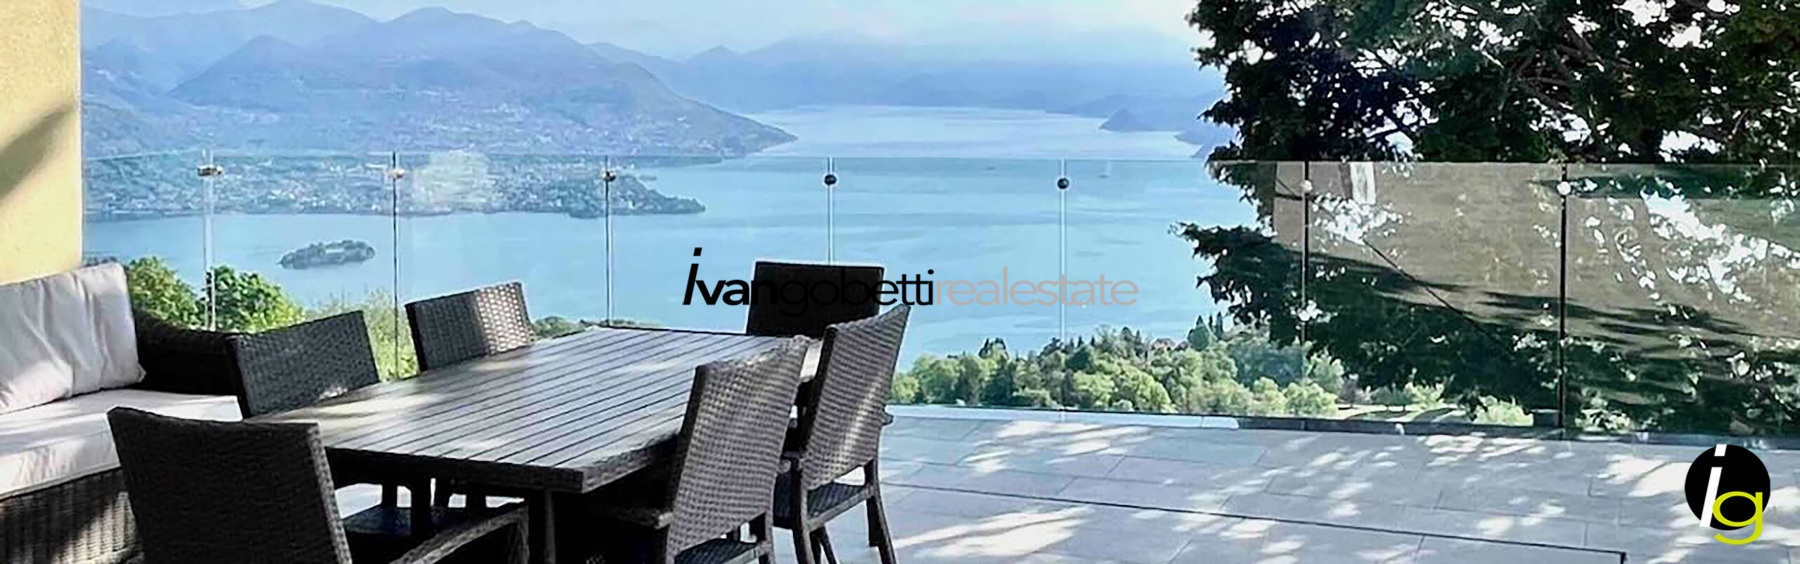 Luxurious modern villa with magnificent lake view and swimming pool on the hills of Stresa Lake Maggiore<br/><span>Product Code: 160123